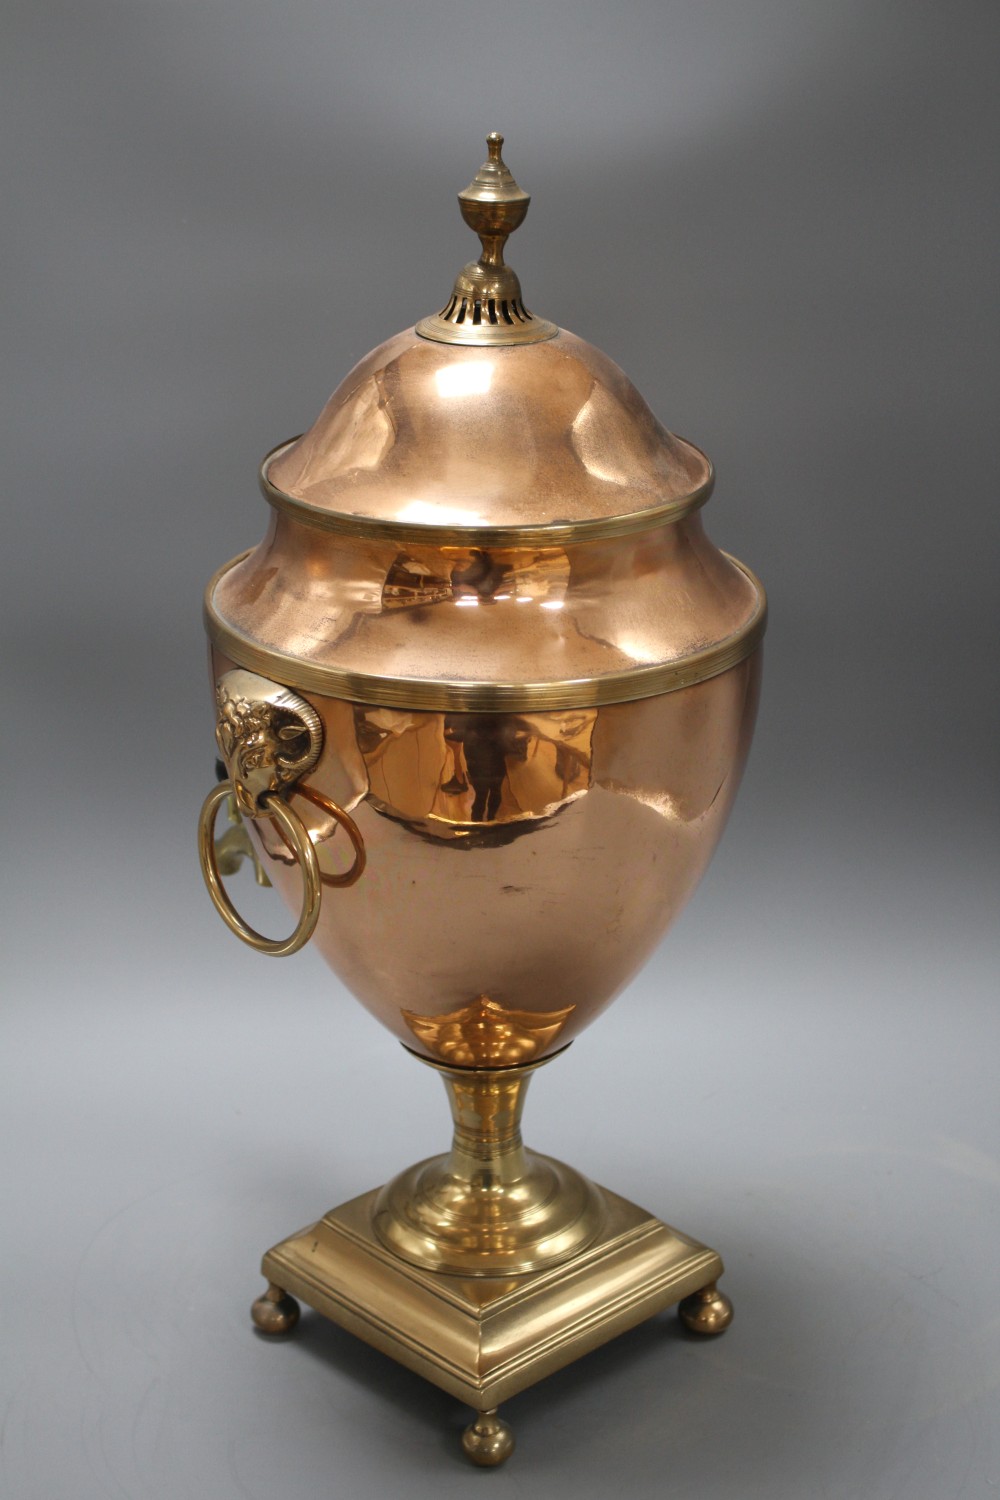 A Regency brass mounted copper tea urn, with rams mask ring handles, height 51cm